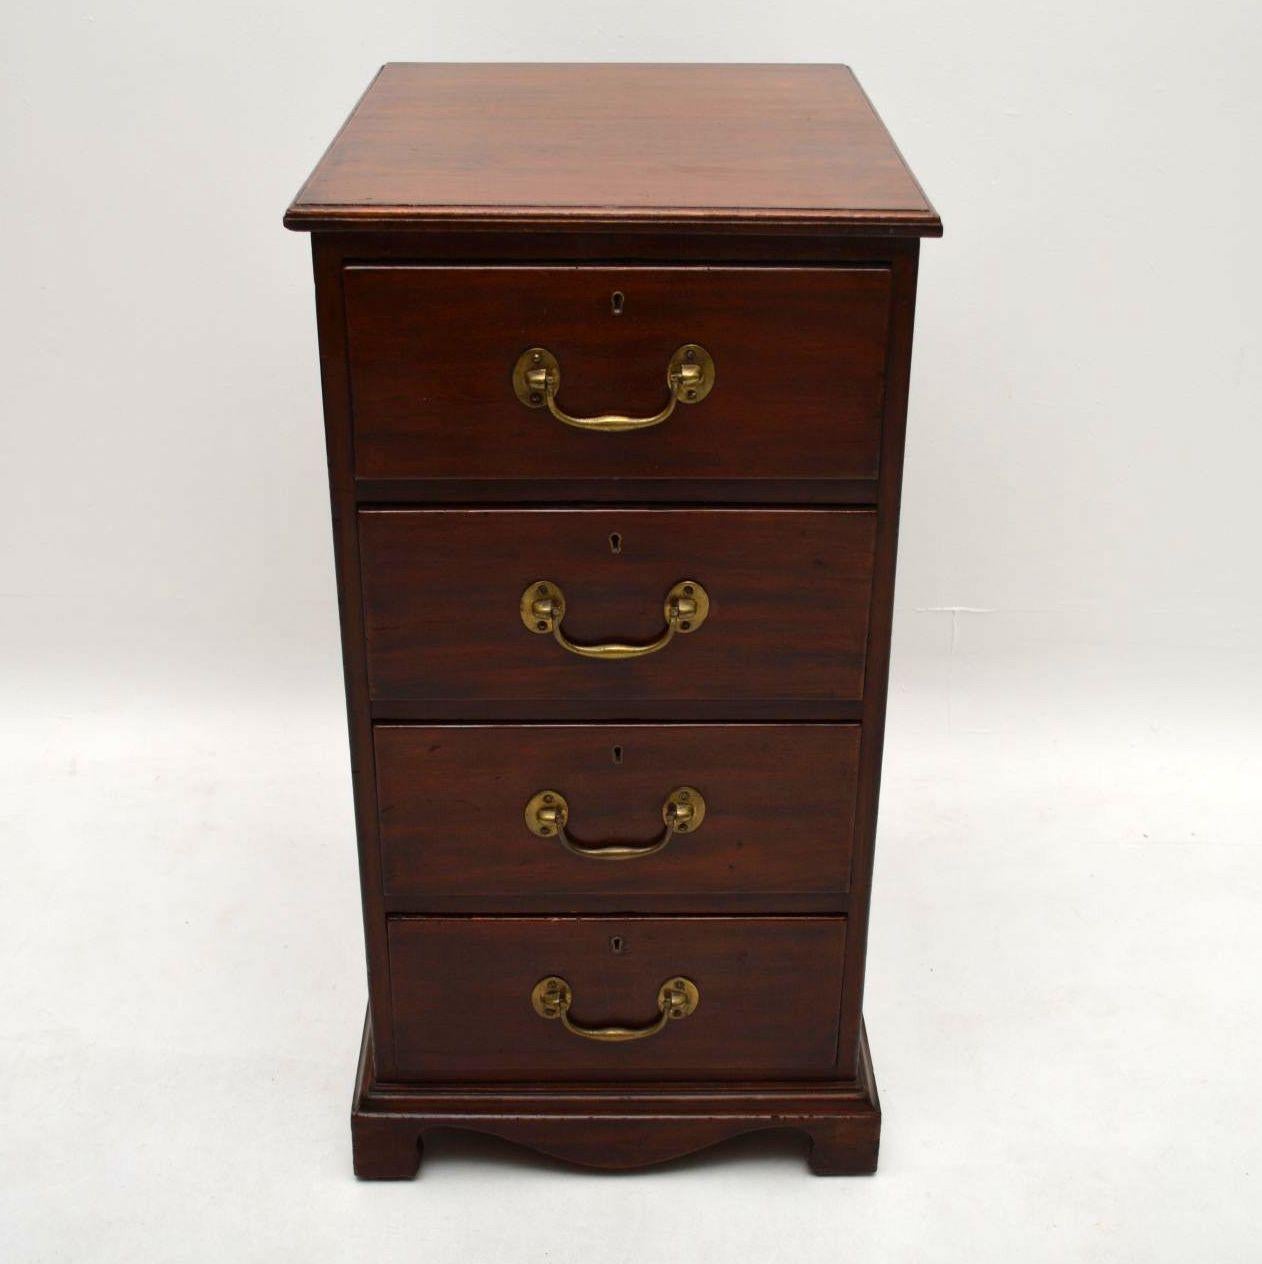 This antique mahogany chest of drawers has quite slim and deep proportions, almost like a filing cabinet size. In fact maybe it was a filing cabinet. It’s in good original condition and is Georgian in style, dating from circa 1890-1910 period. There